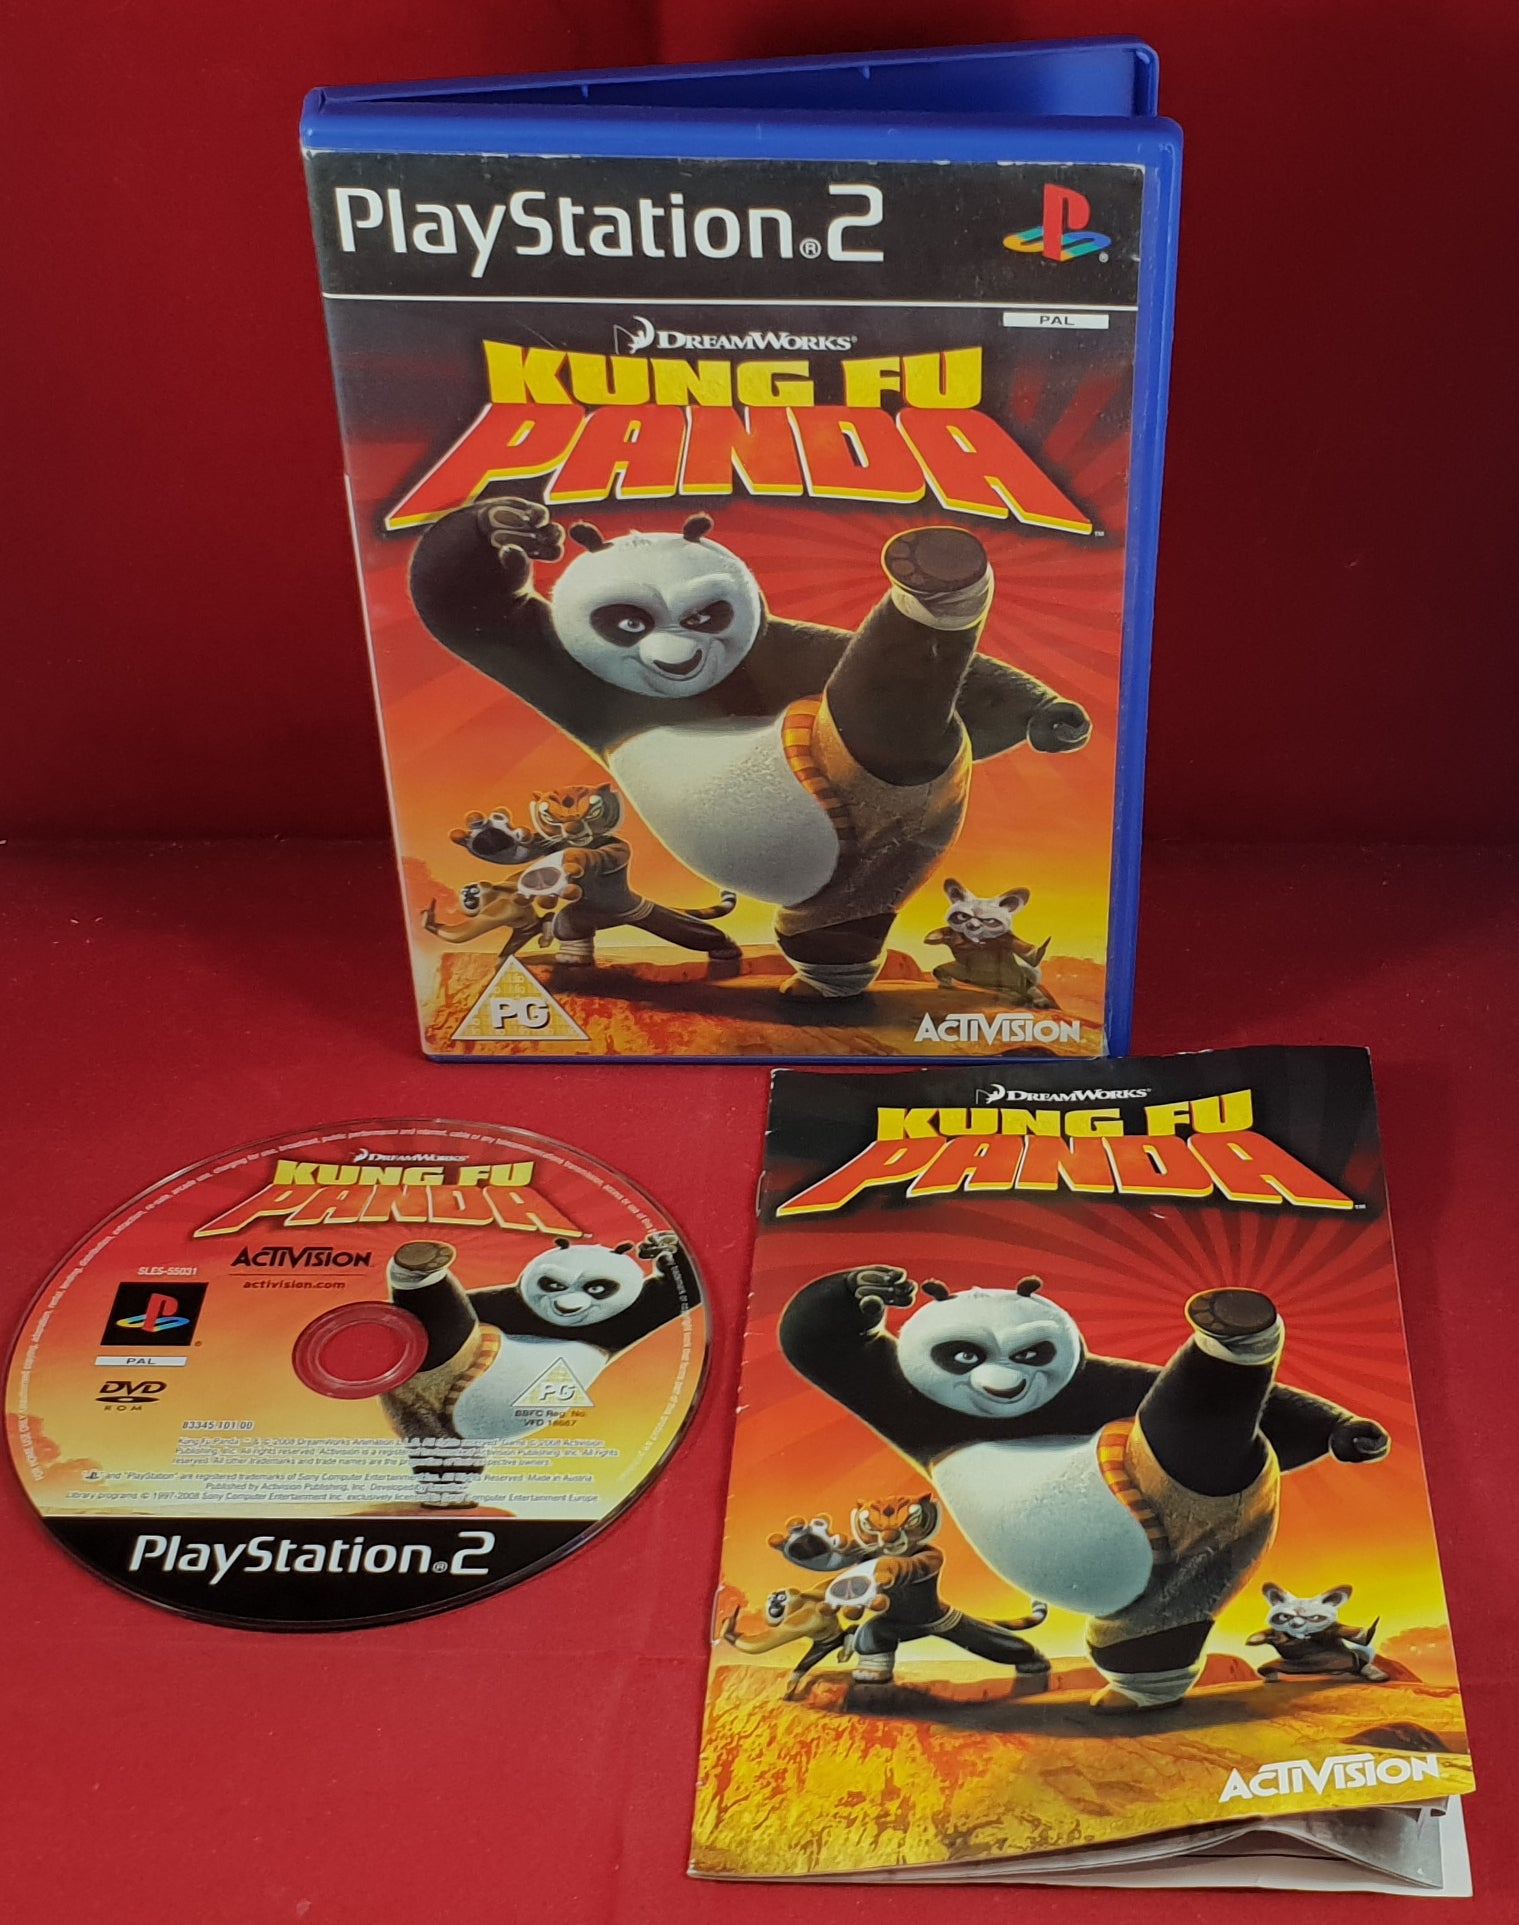 ps2 game crc 0x32088394